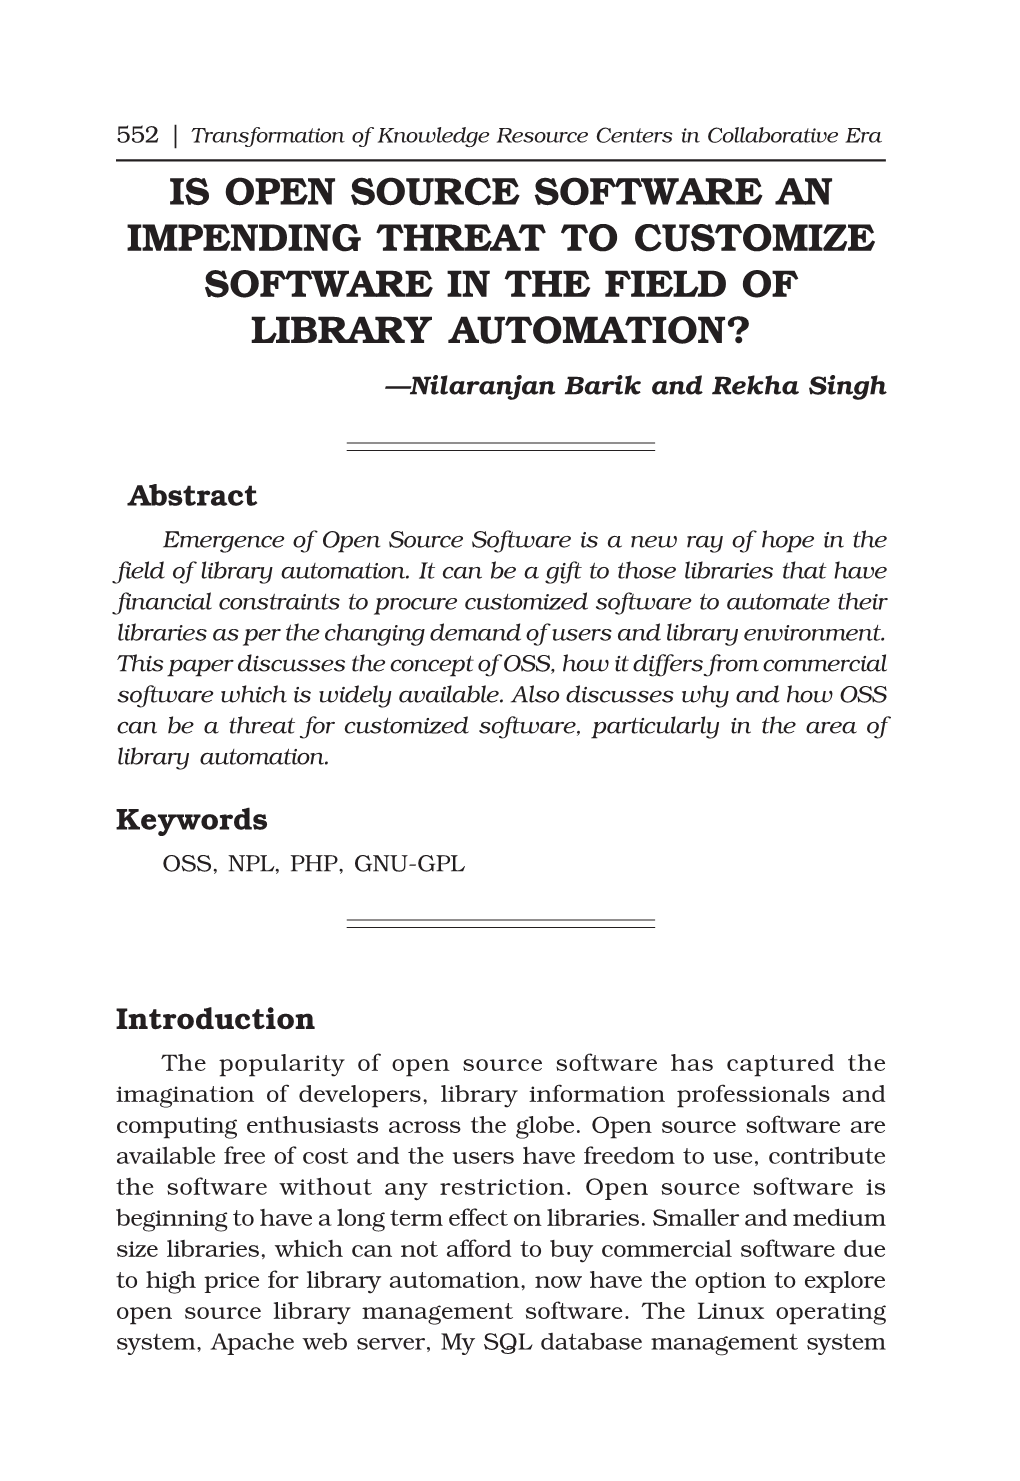 IS OPEN SOURCE SOFTWARE an IMPENDING THREAT to CUSTOMIZE SOFTWARE in the FIELD of LIBRARY AUTOMATION? —Nilaranjan Barik and Rekha Singh